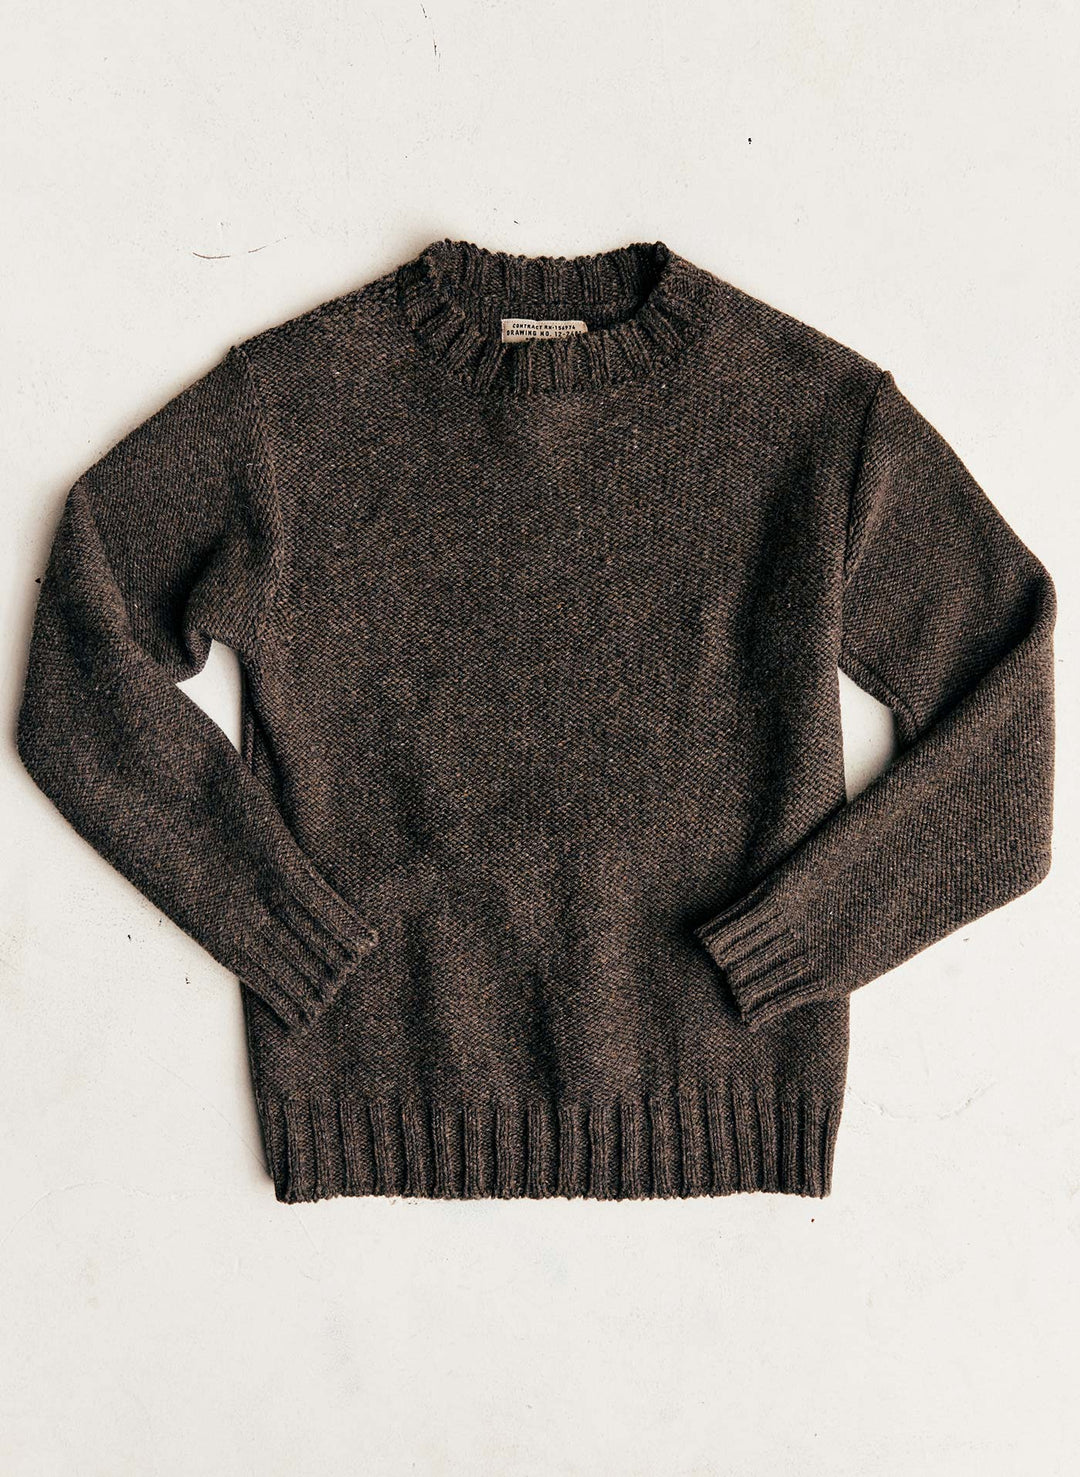 a brown sweater on a white surface